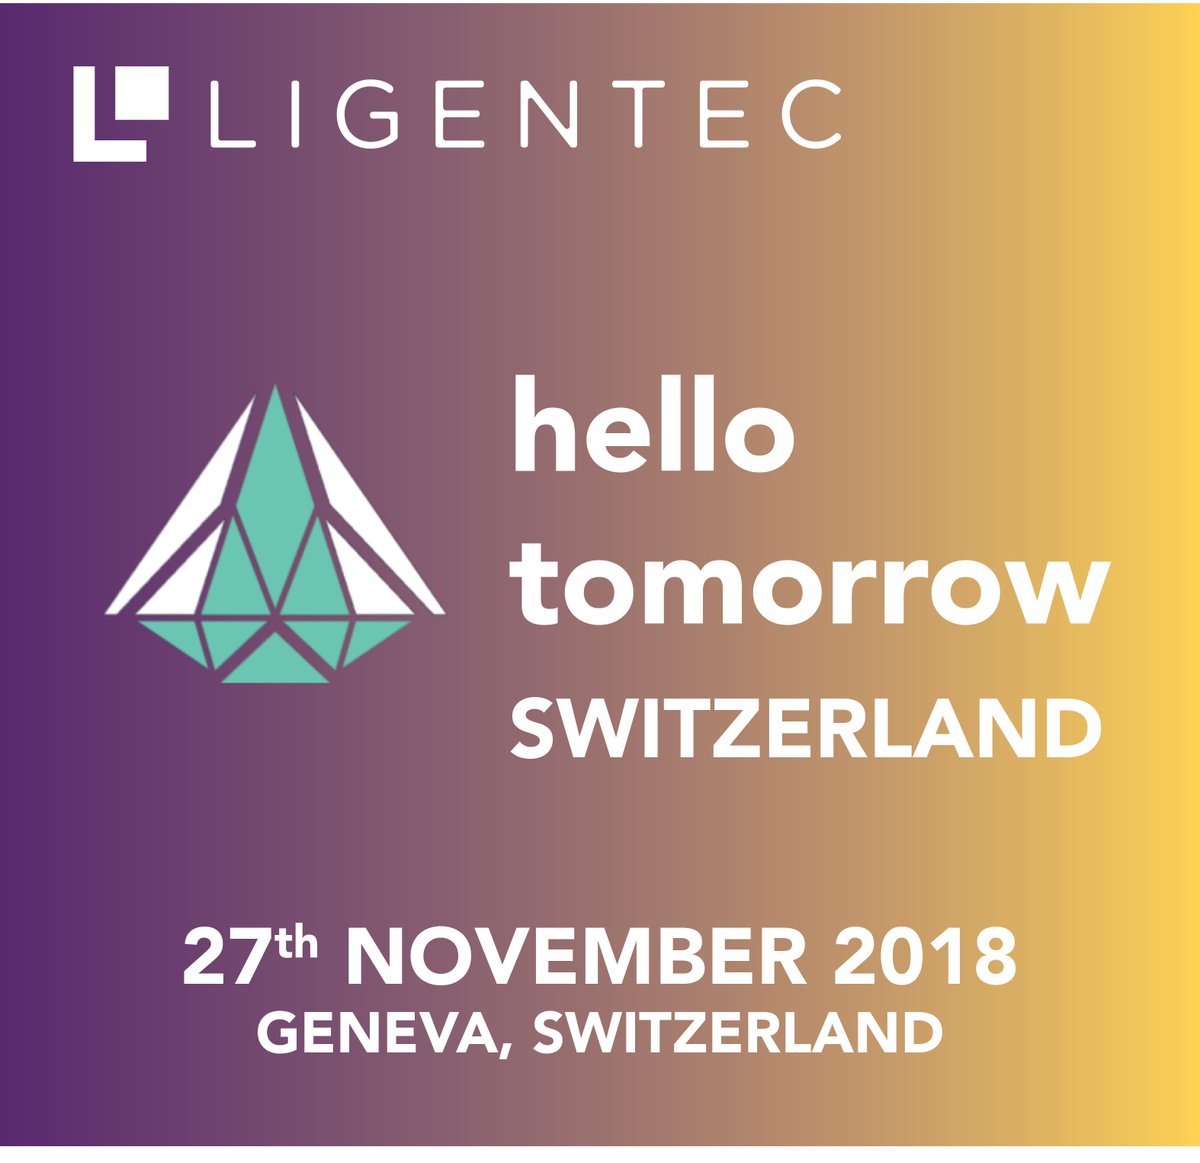 LIGENTECs @LigentecPIC co-founder Michael Geiselmann will be within the speakers of Hello Tomorrow @hellotmrc in @CampusBiotech Geneva, 27th Nov for an exciting conference about the future of #Hardware for the #quantumrevolution. Buy your ticket now!
#lowlossintegratedphotonics